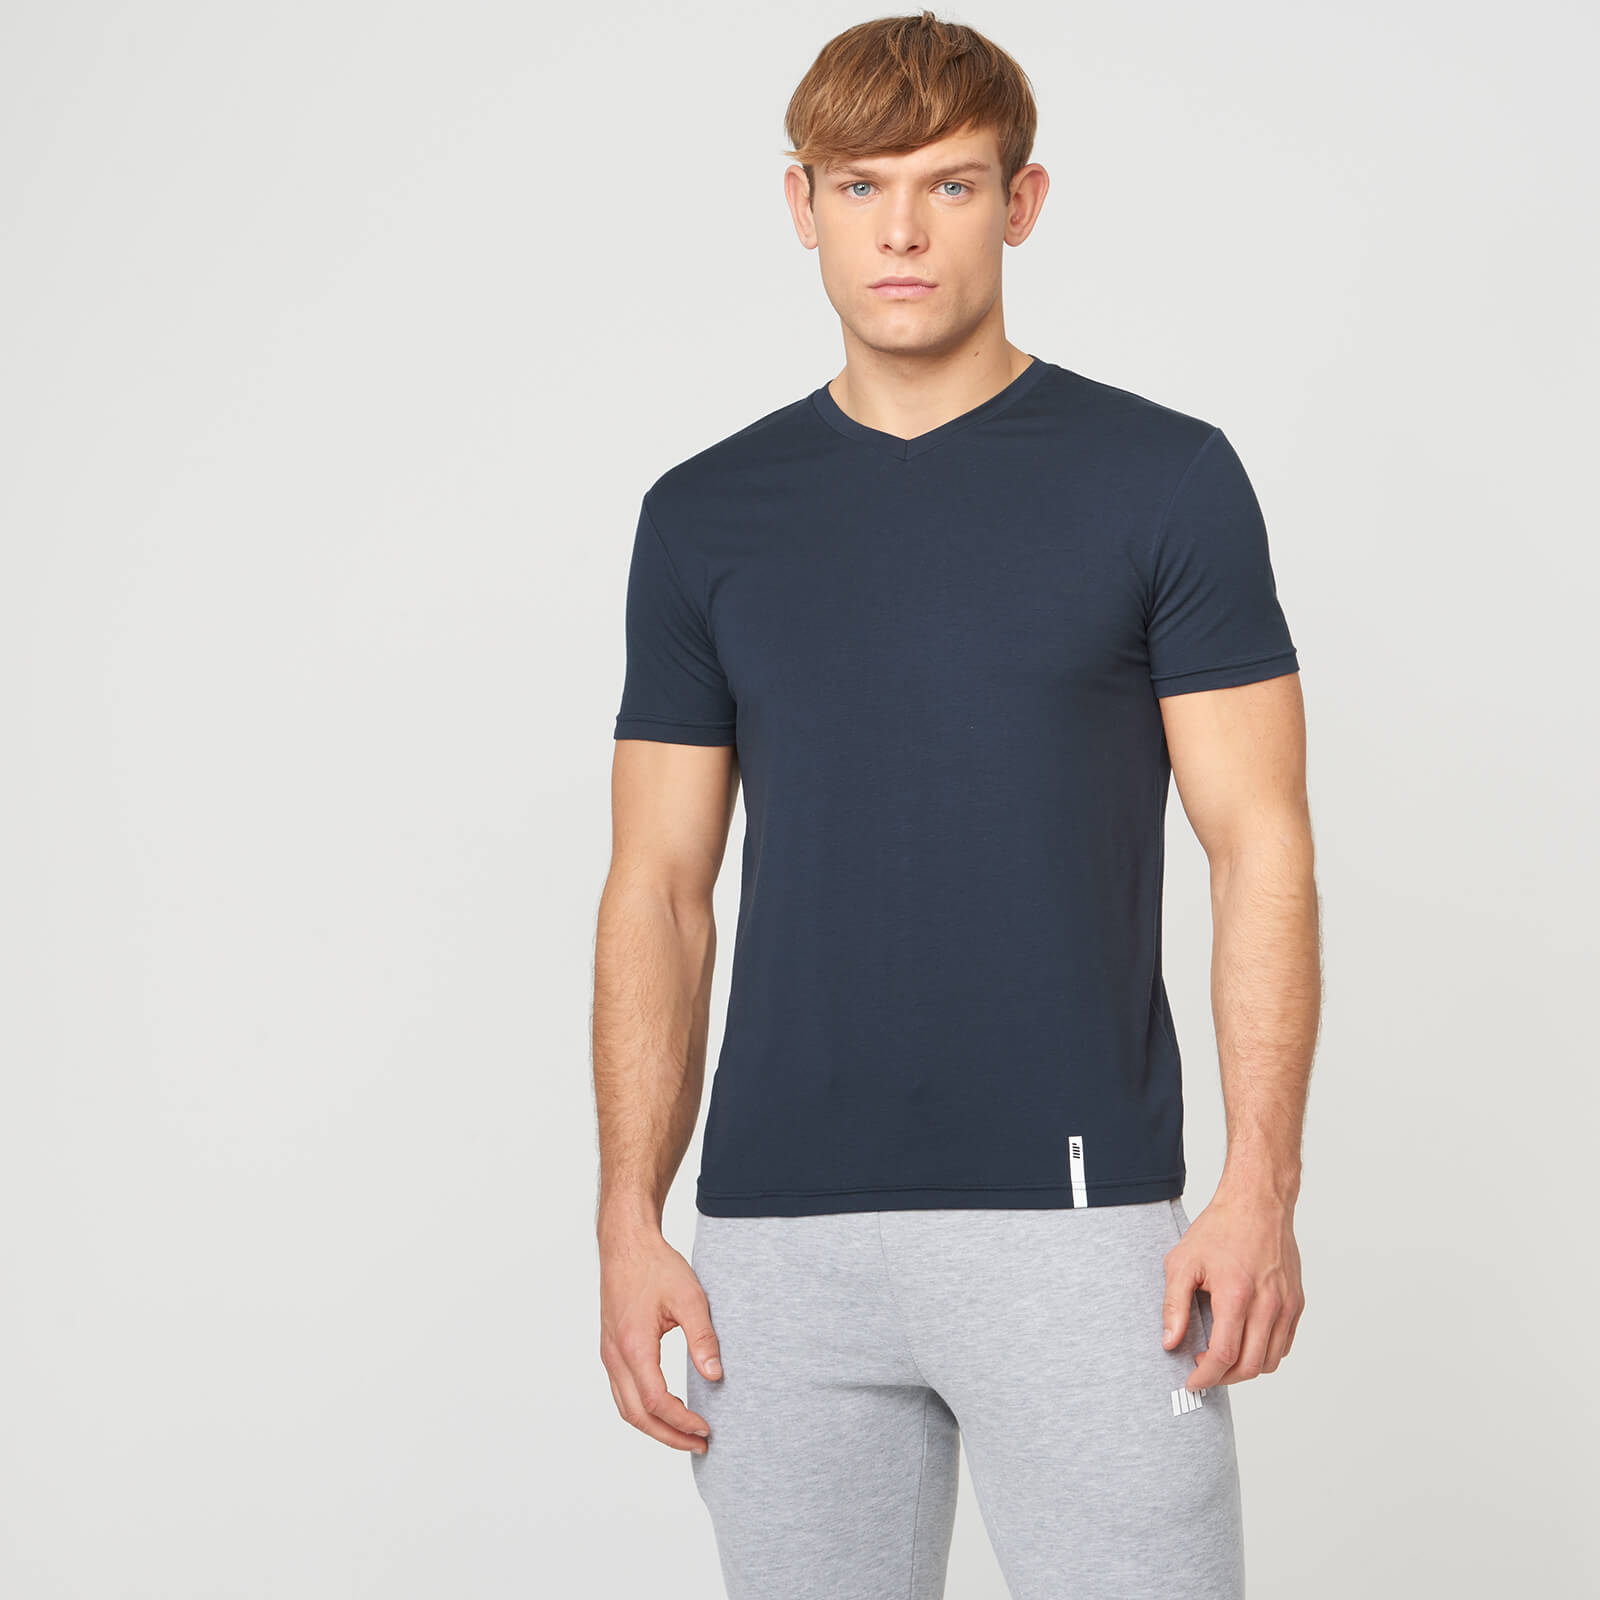 Myprotein Luxe Classic V-Neck T-Shirt